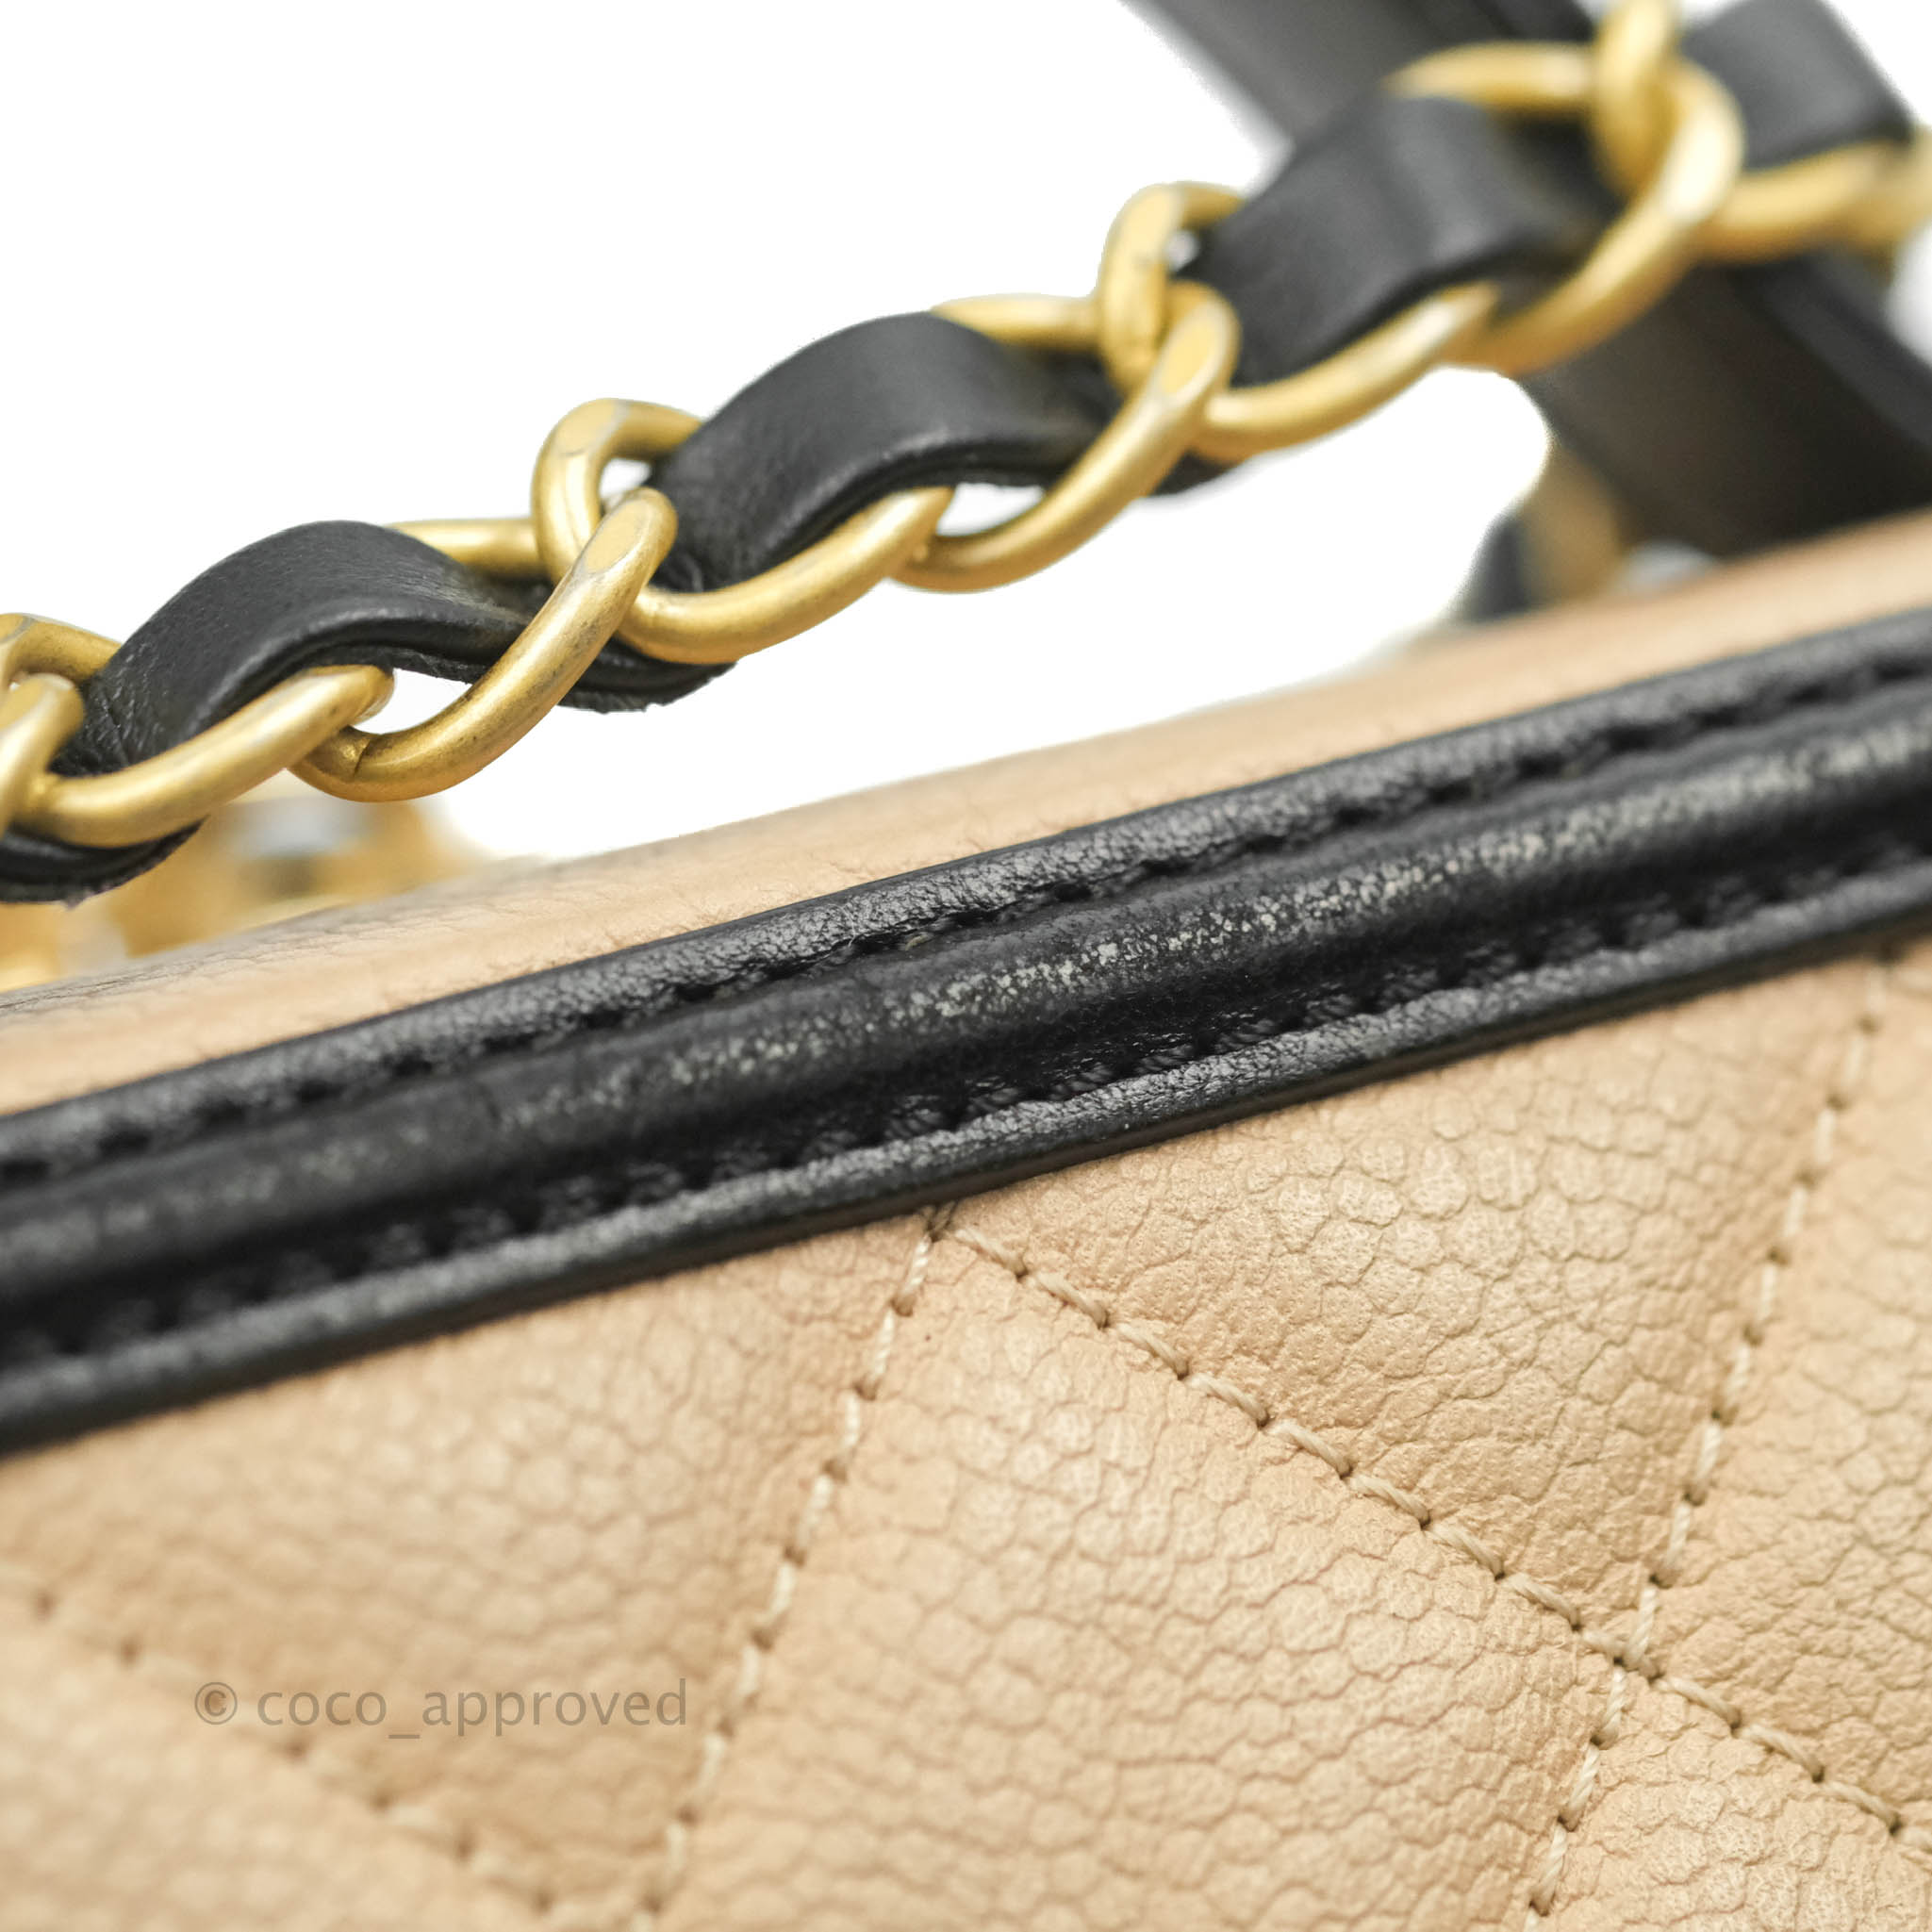 Chanel Quilted Medium CC Filigree Vanity Case Beige Caviar Gold Hardwa –  Coco Approved Studio